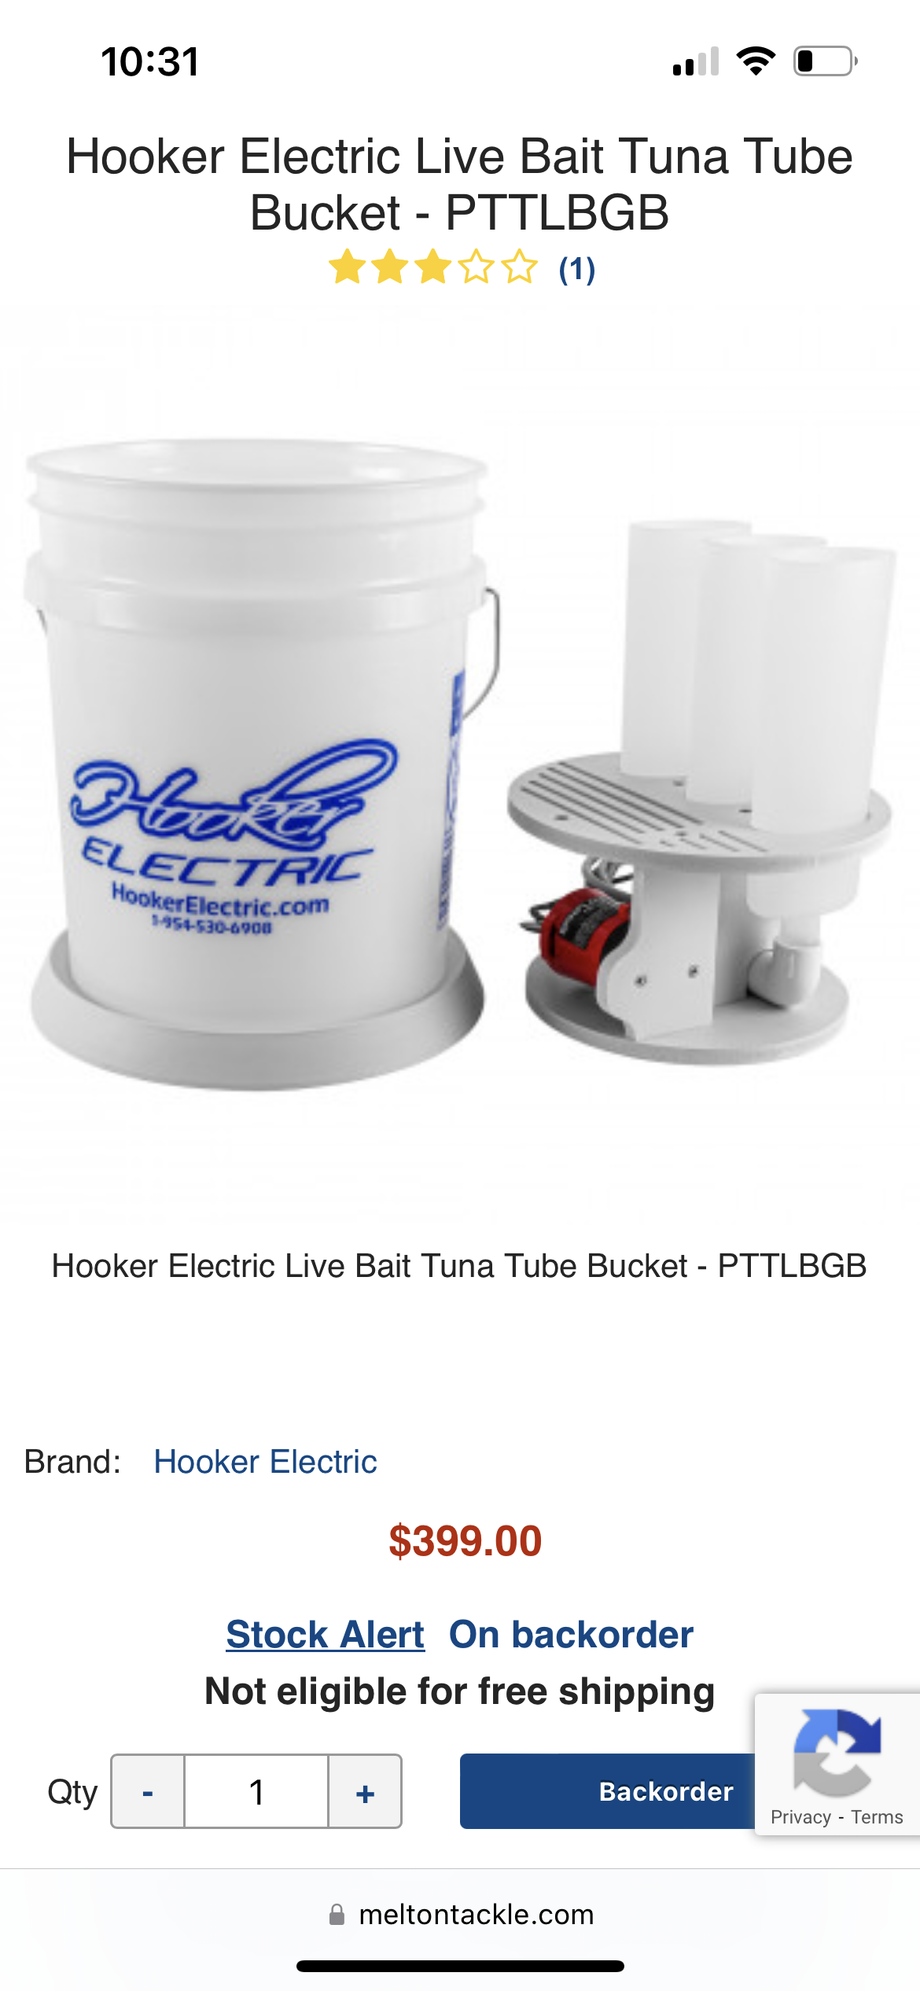 Hooker live bait tuna tube bucket - The Hull Truth - Boating and